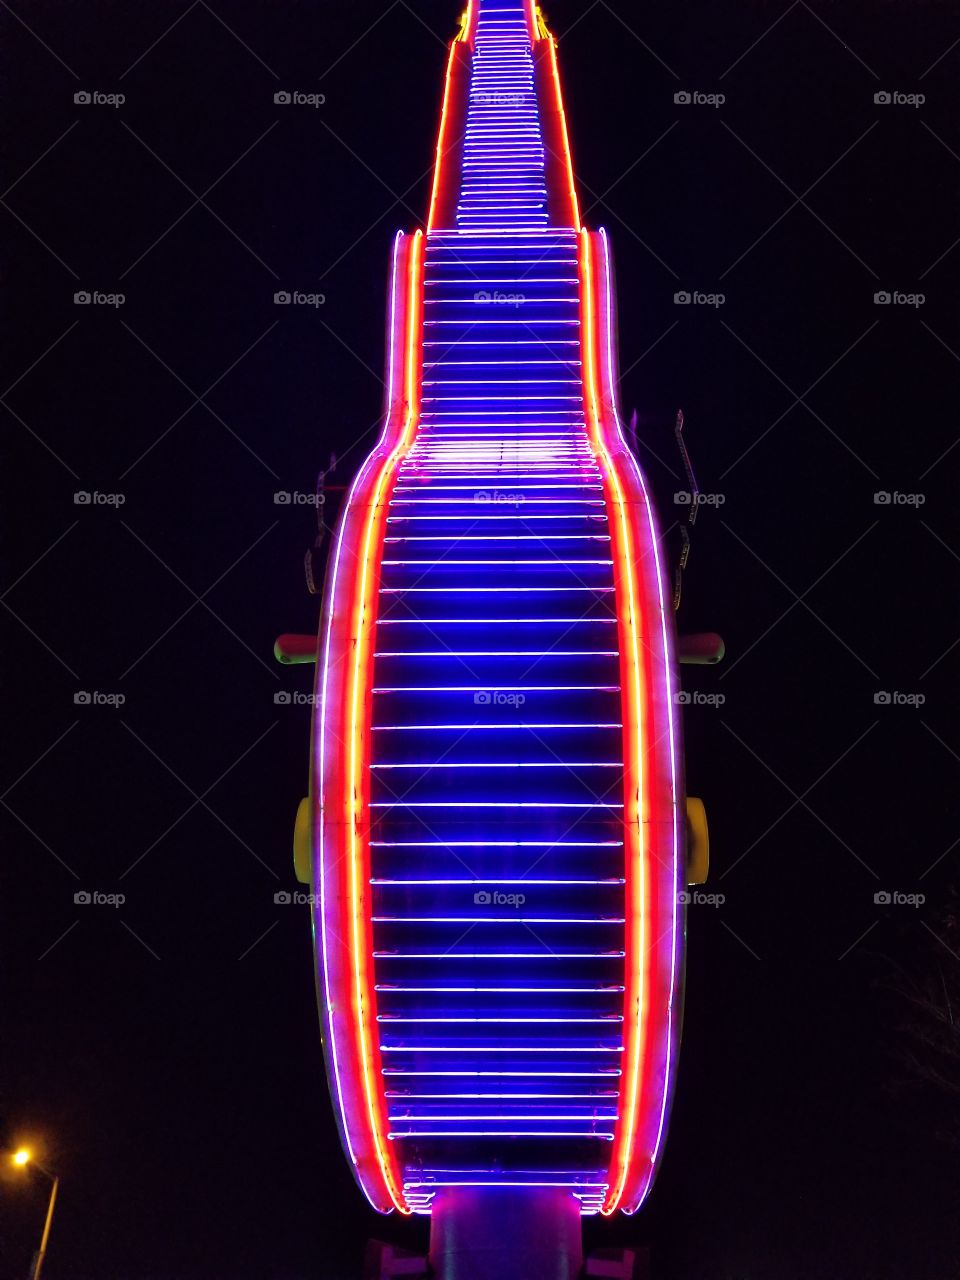 Those neon lights at the Hard Rock